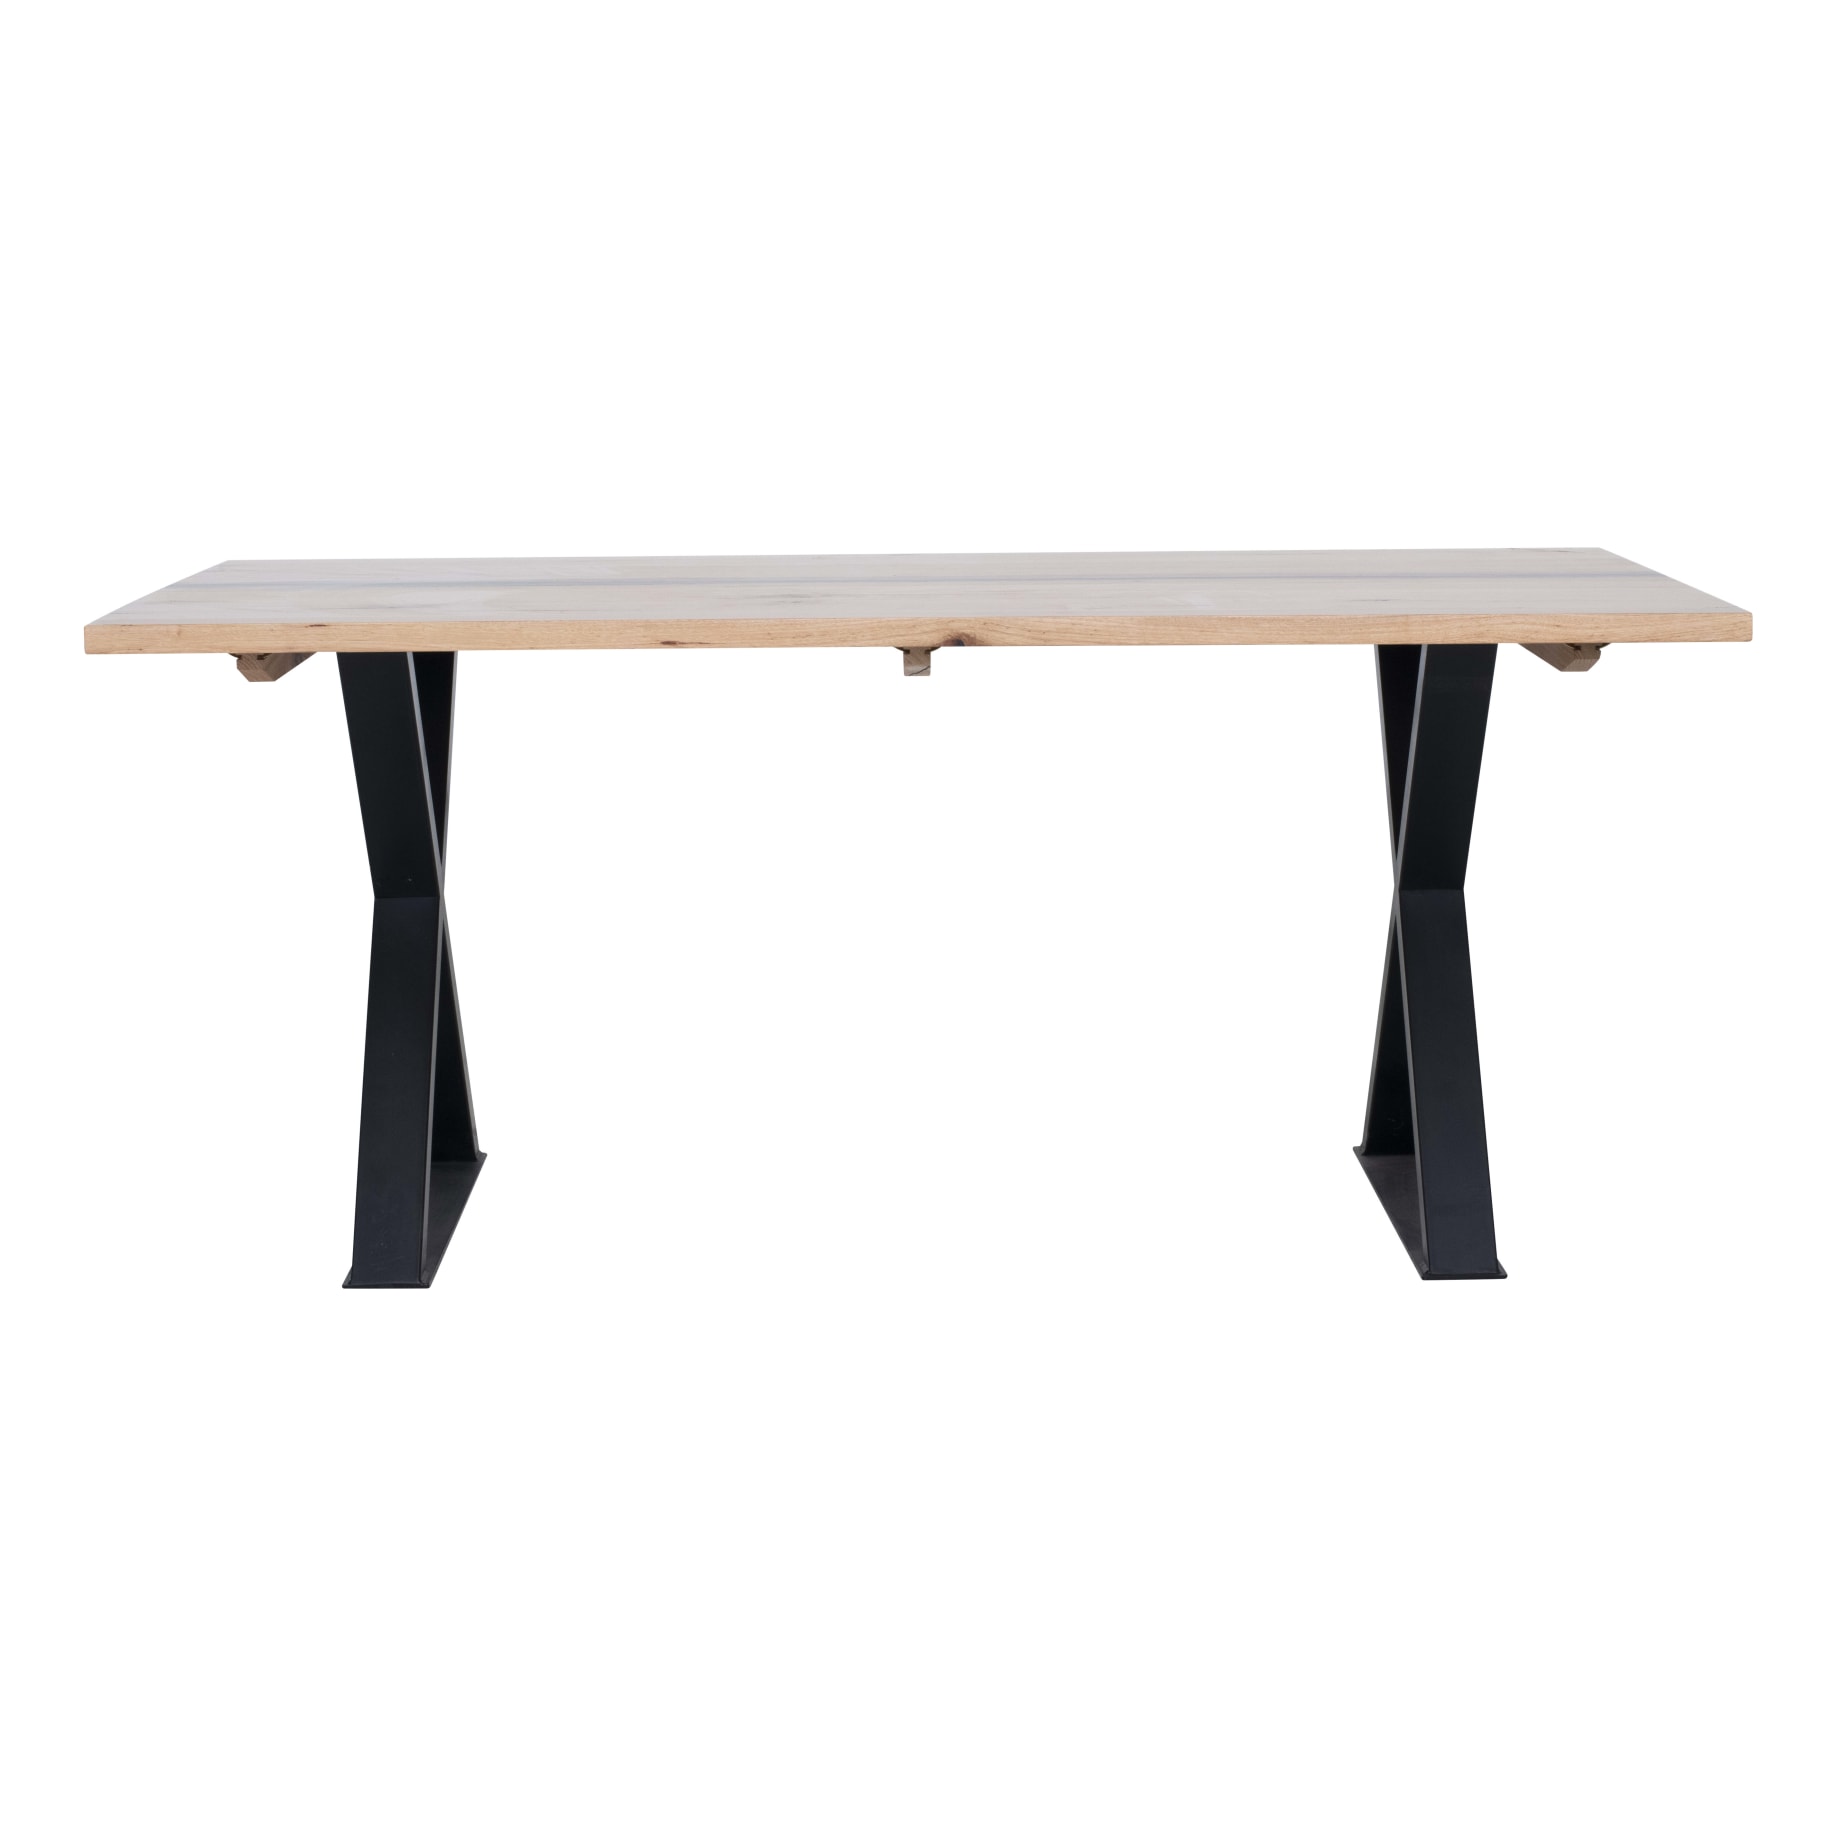 Rawson Dining Table 210cm in Messmate W/ Resin